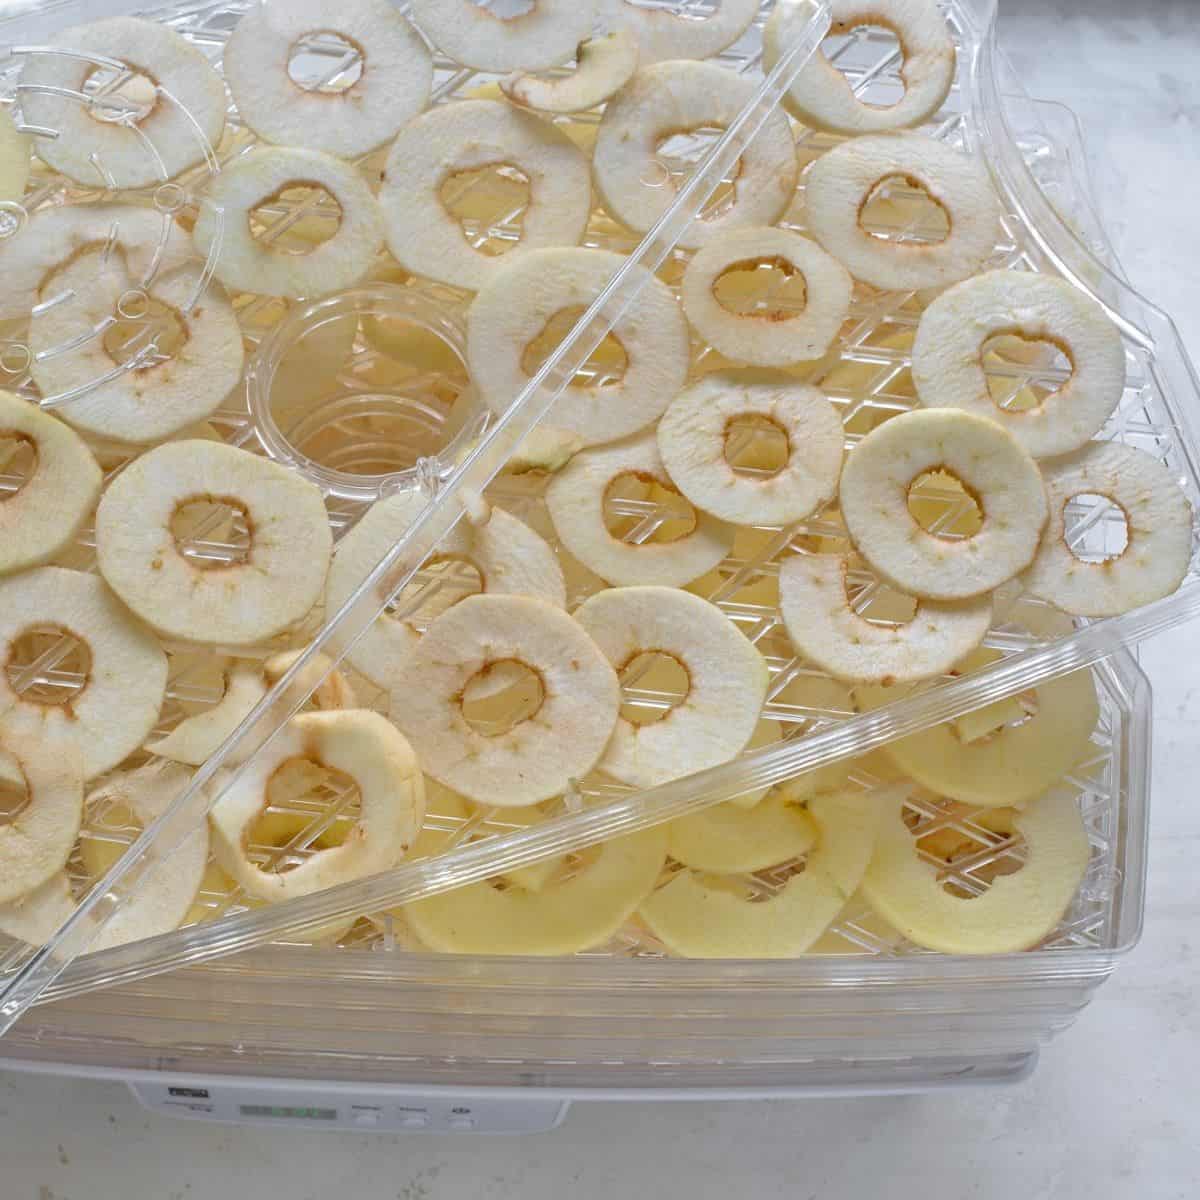 Apple rings layd out on dehydrator trays.